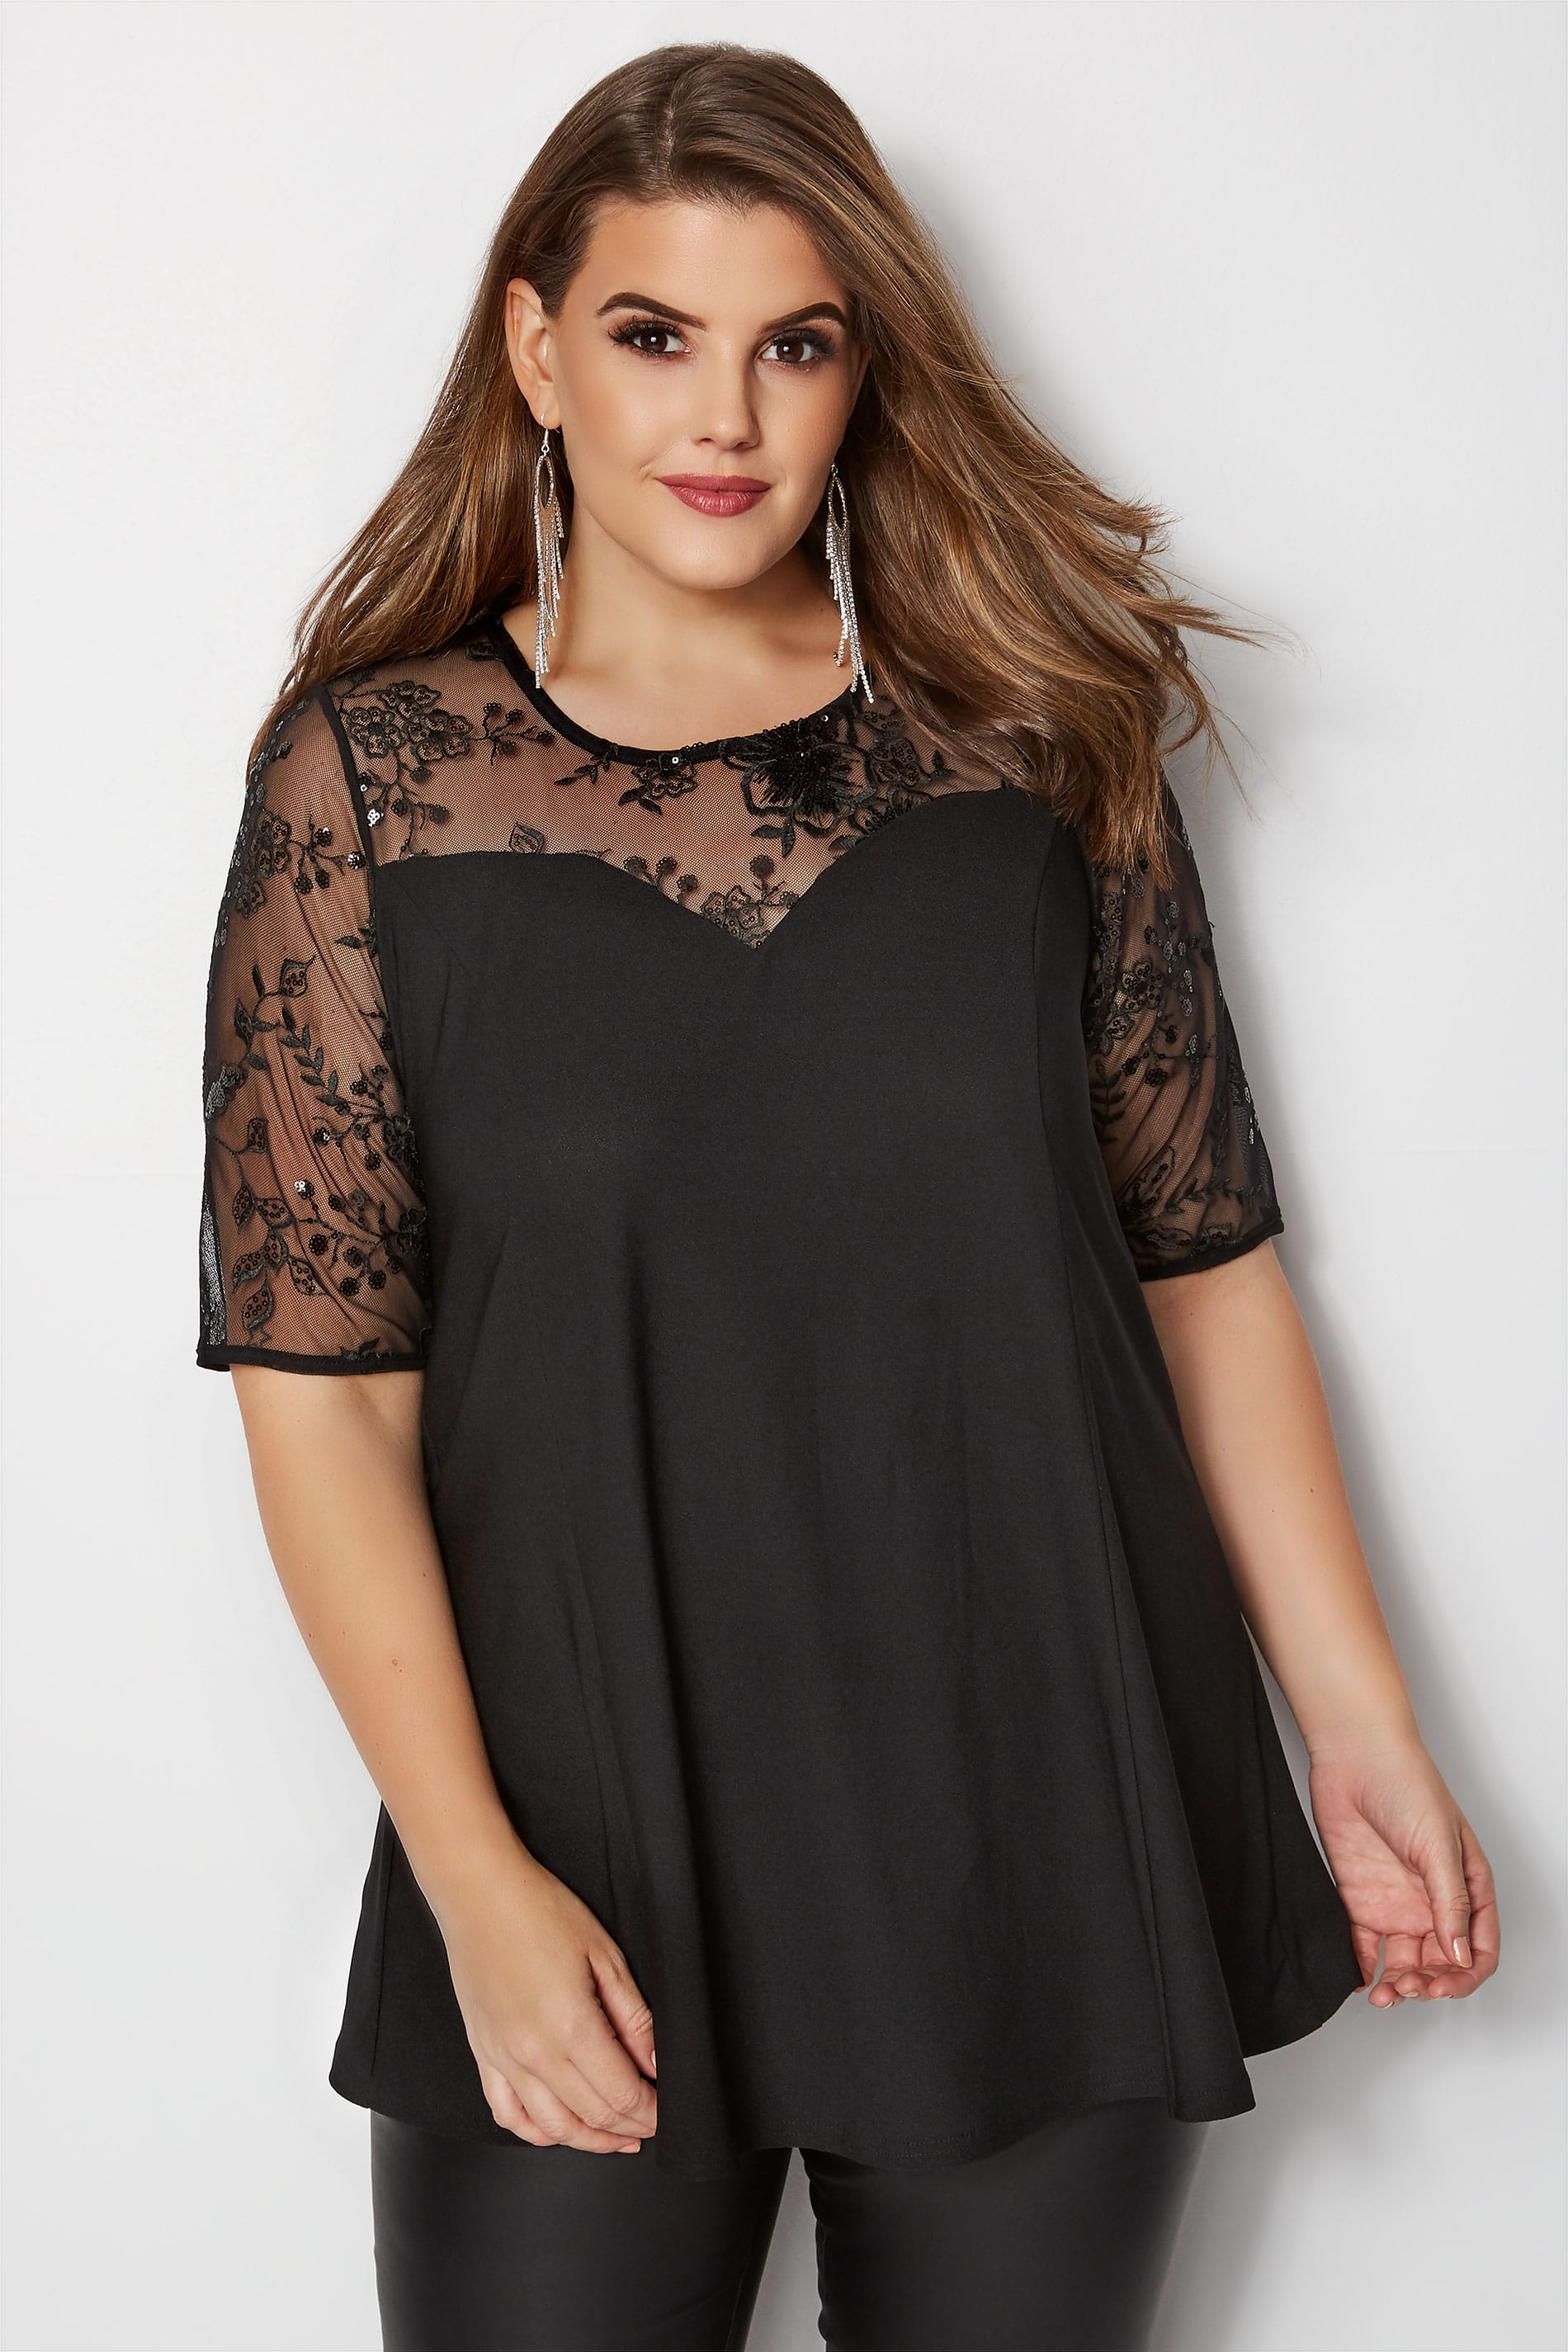 Yours London Black Sequin Peplum Top Plus Sizes 16 To 32 Yours Clothing